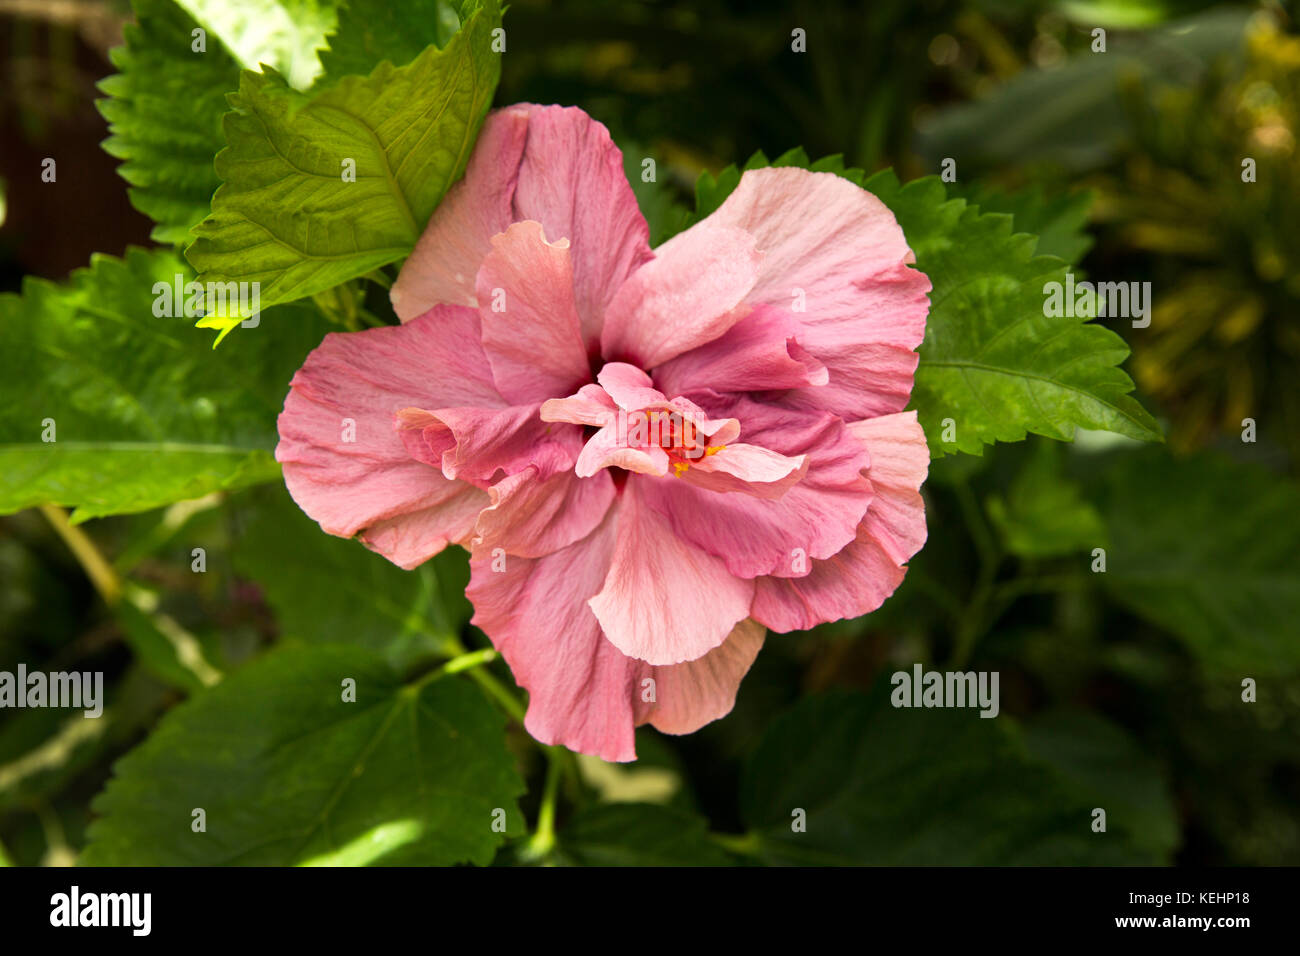 The Seychelles, Mahe, flowers, dusky rose pink hibiscus growing in garden Stock Photo